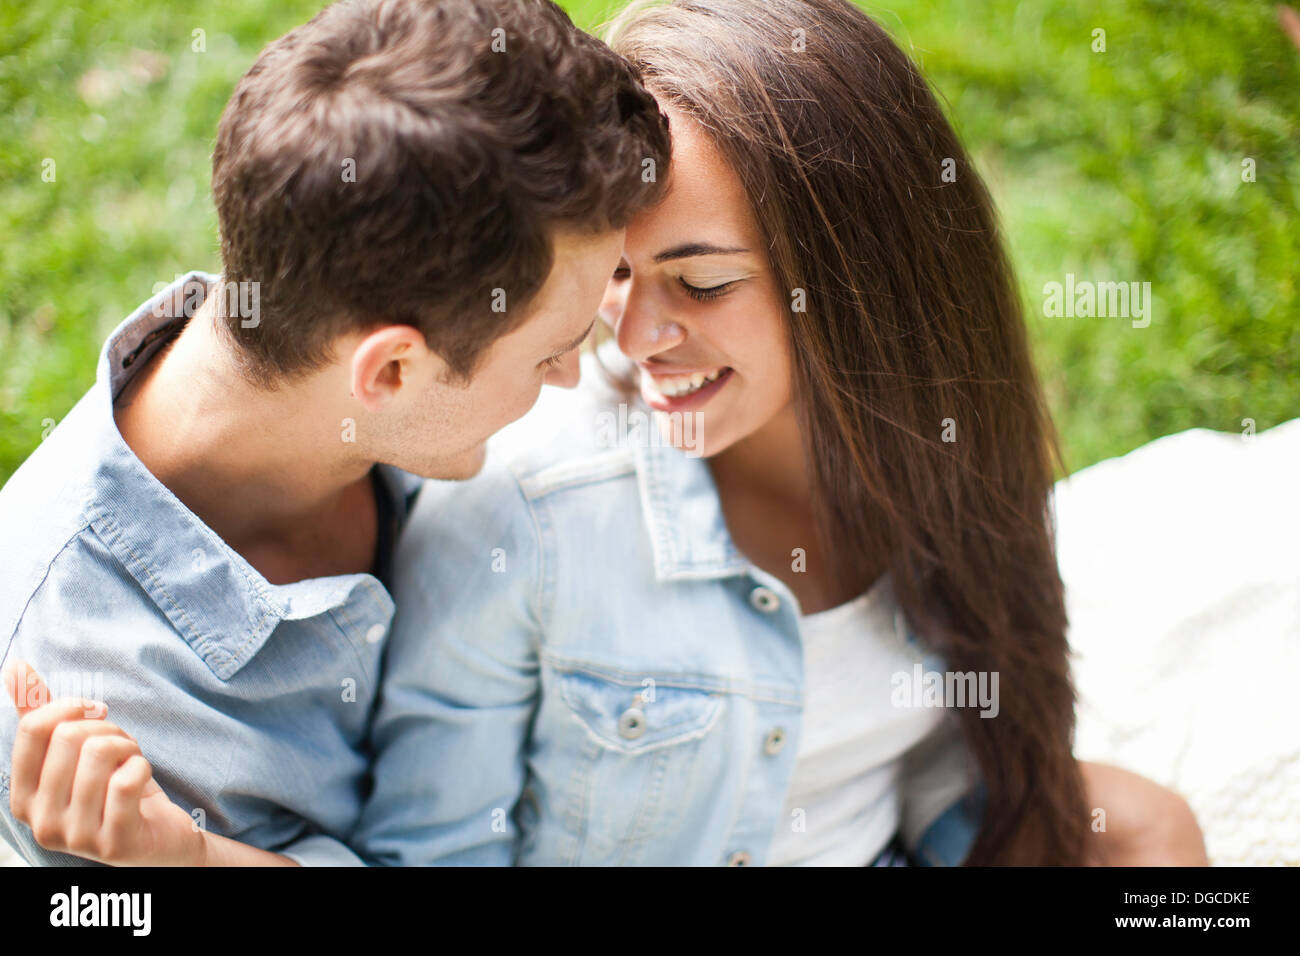 Young couple face to face in park, close up Stock Photo